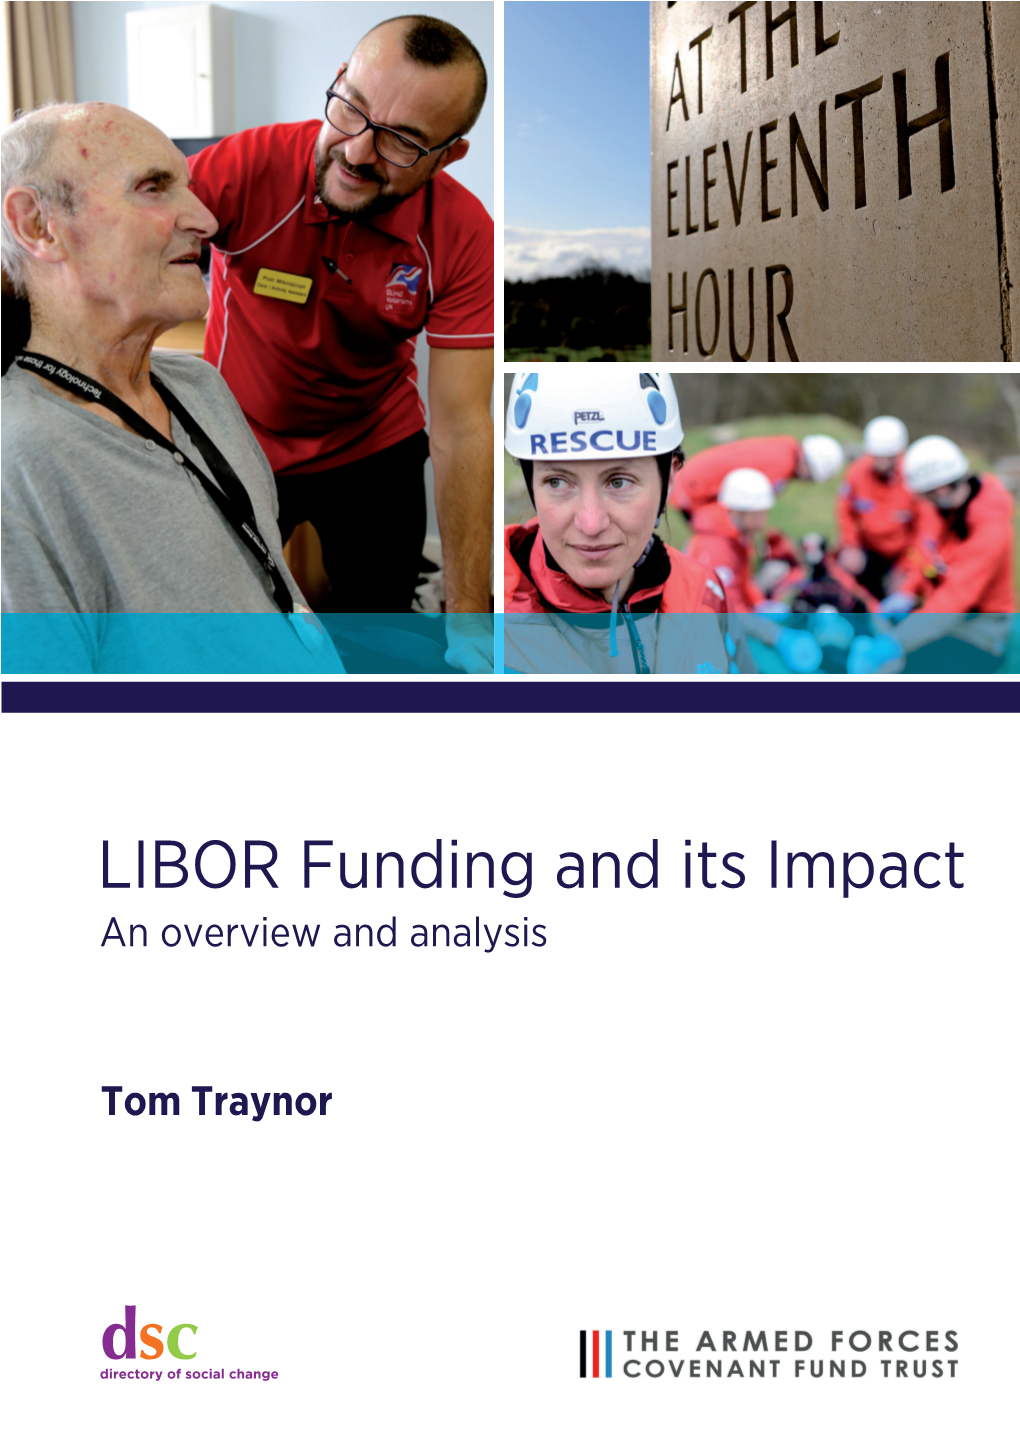 LIBOR Funding and Its Impact an Overview and Analysis